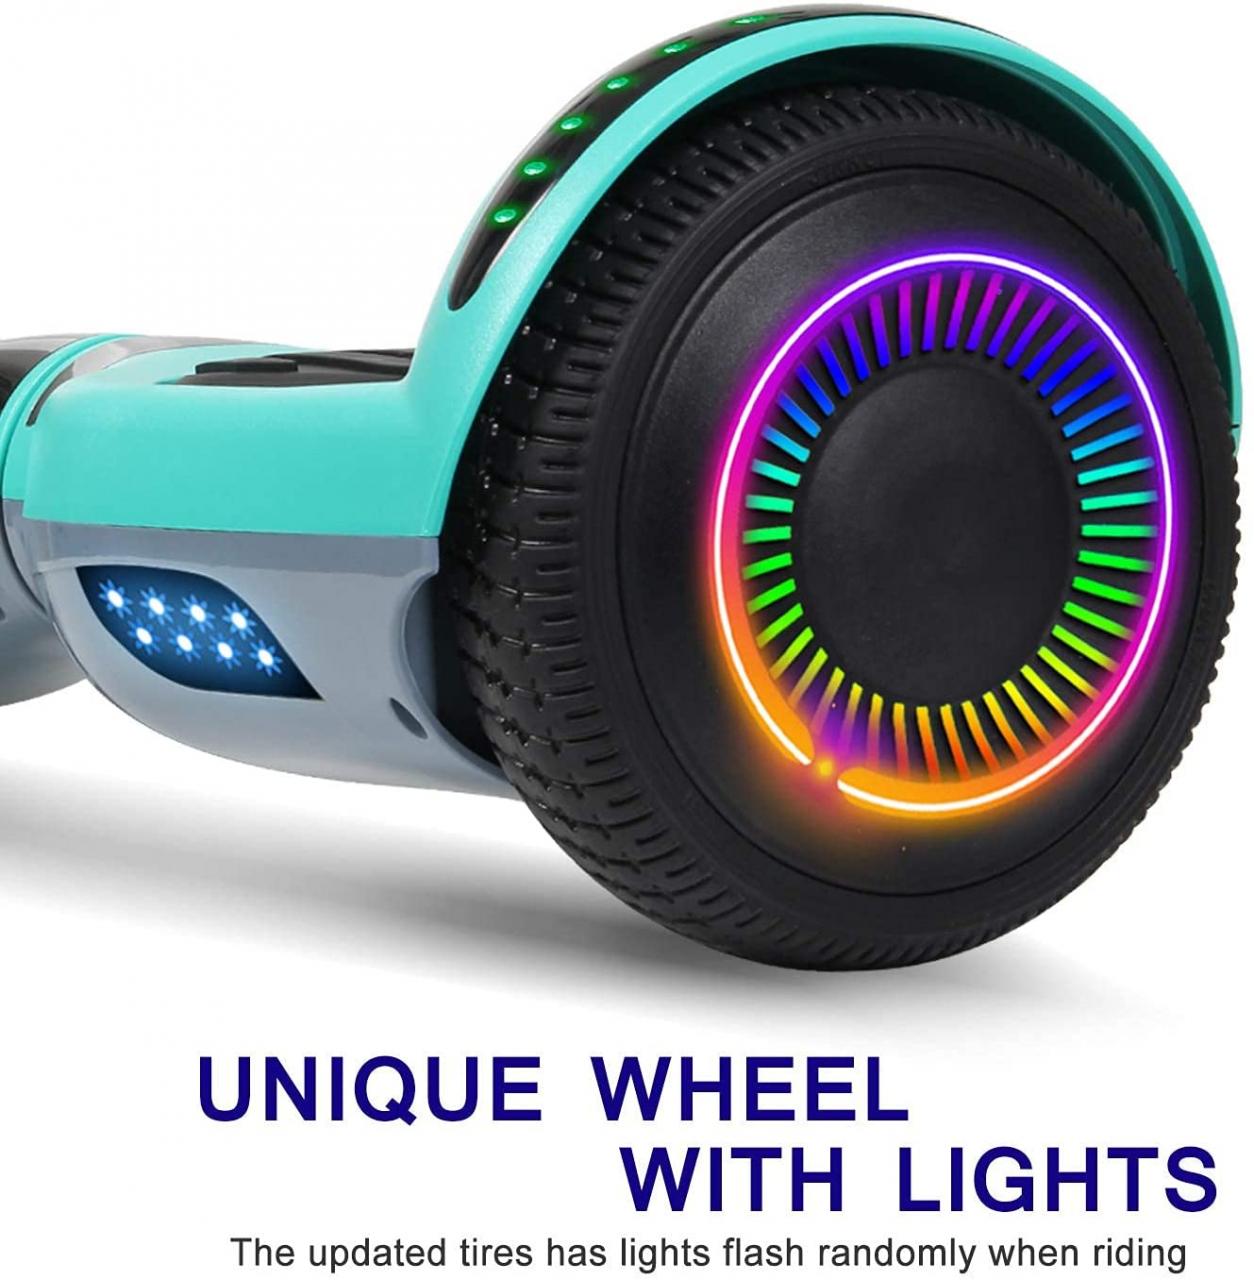 Buy Felimoda Hoverboard for Kids and Adults, 6.5 Two-Wheel Self Balancing  Scooters Hoverboard with Bluetooth Speaker & LED Lights Online in Hong  Kong. B07MM12RGW